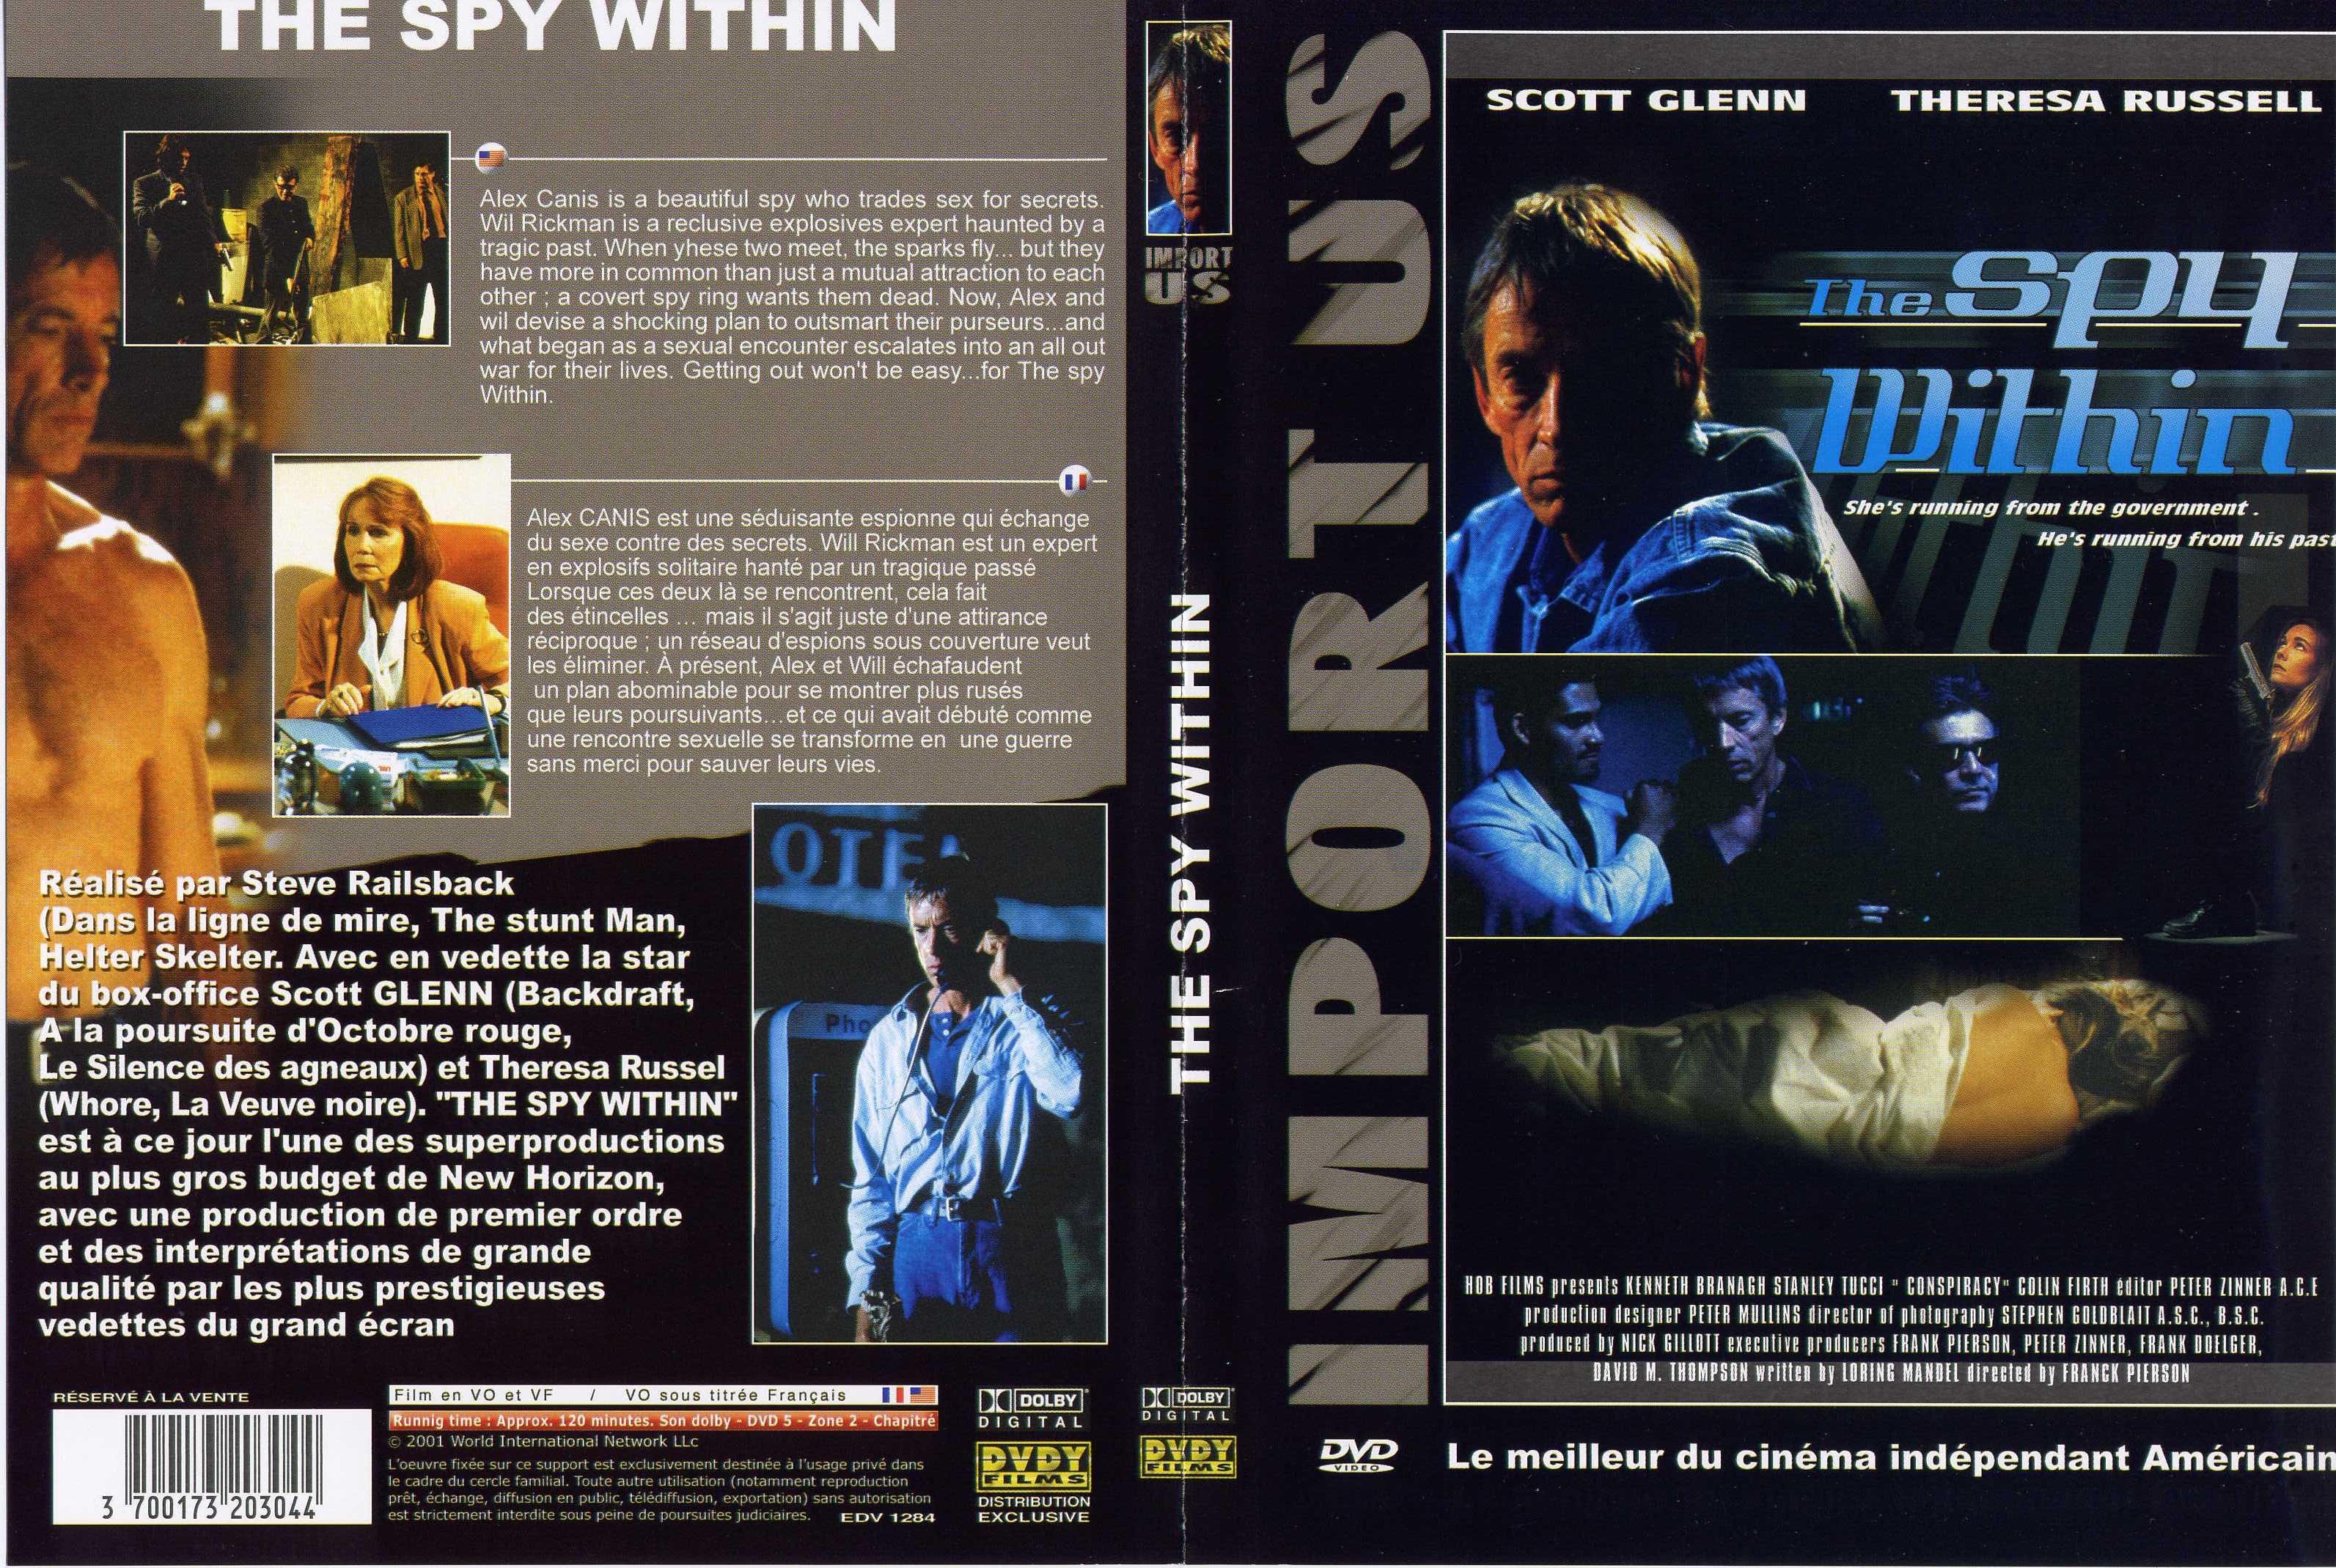 Jaquette DVD The spy within